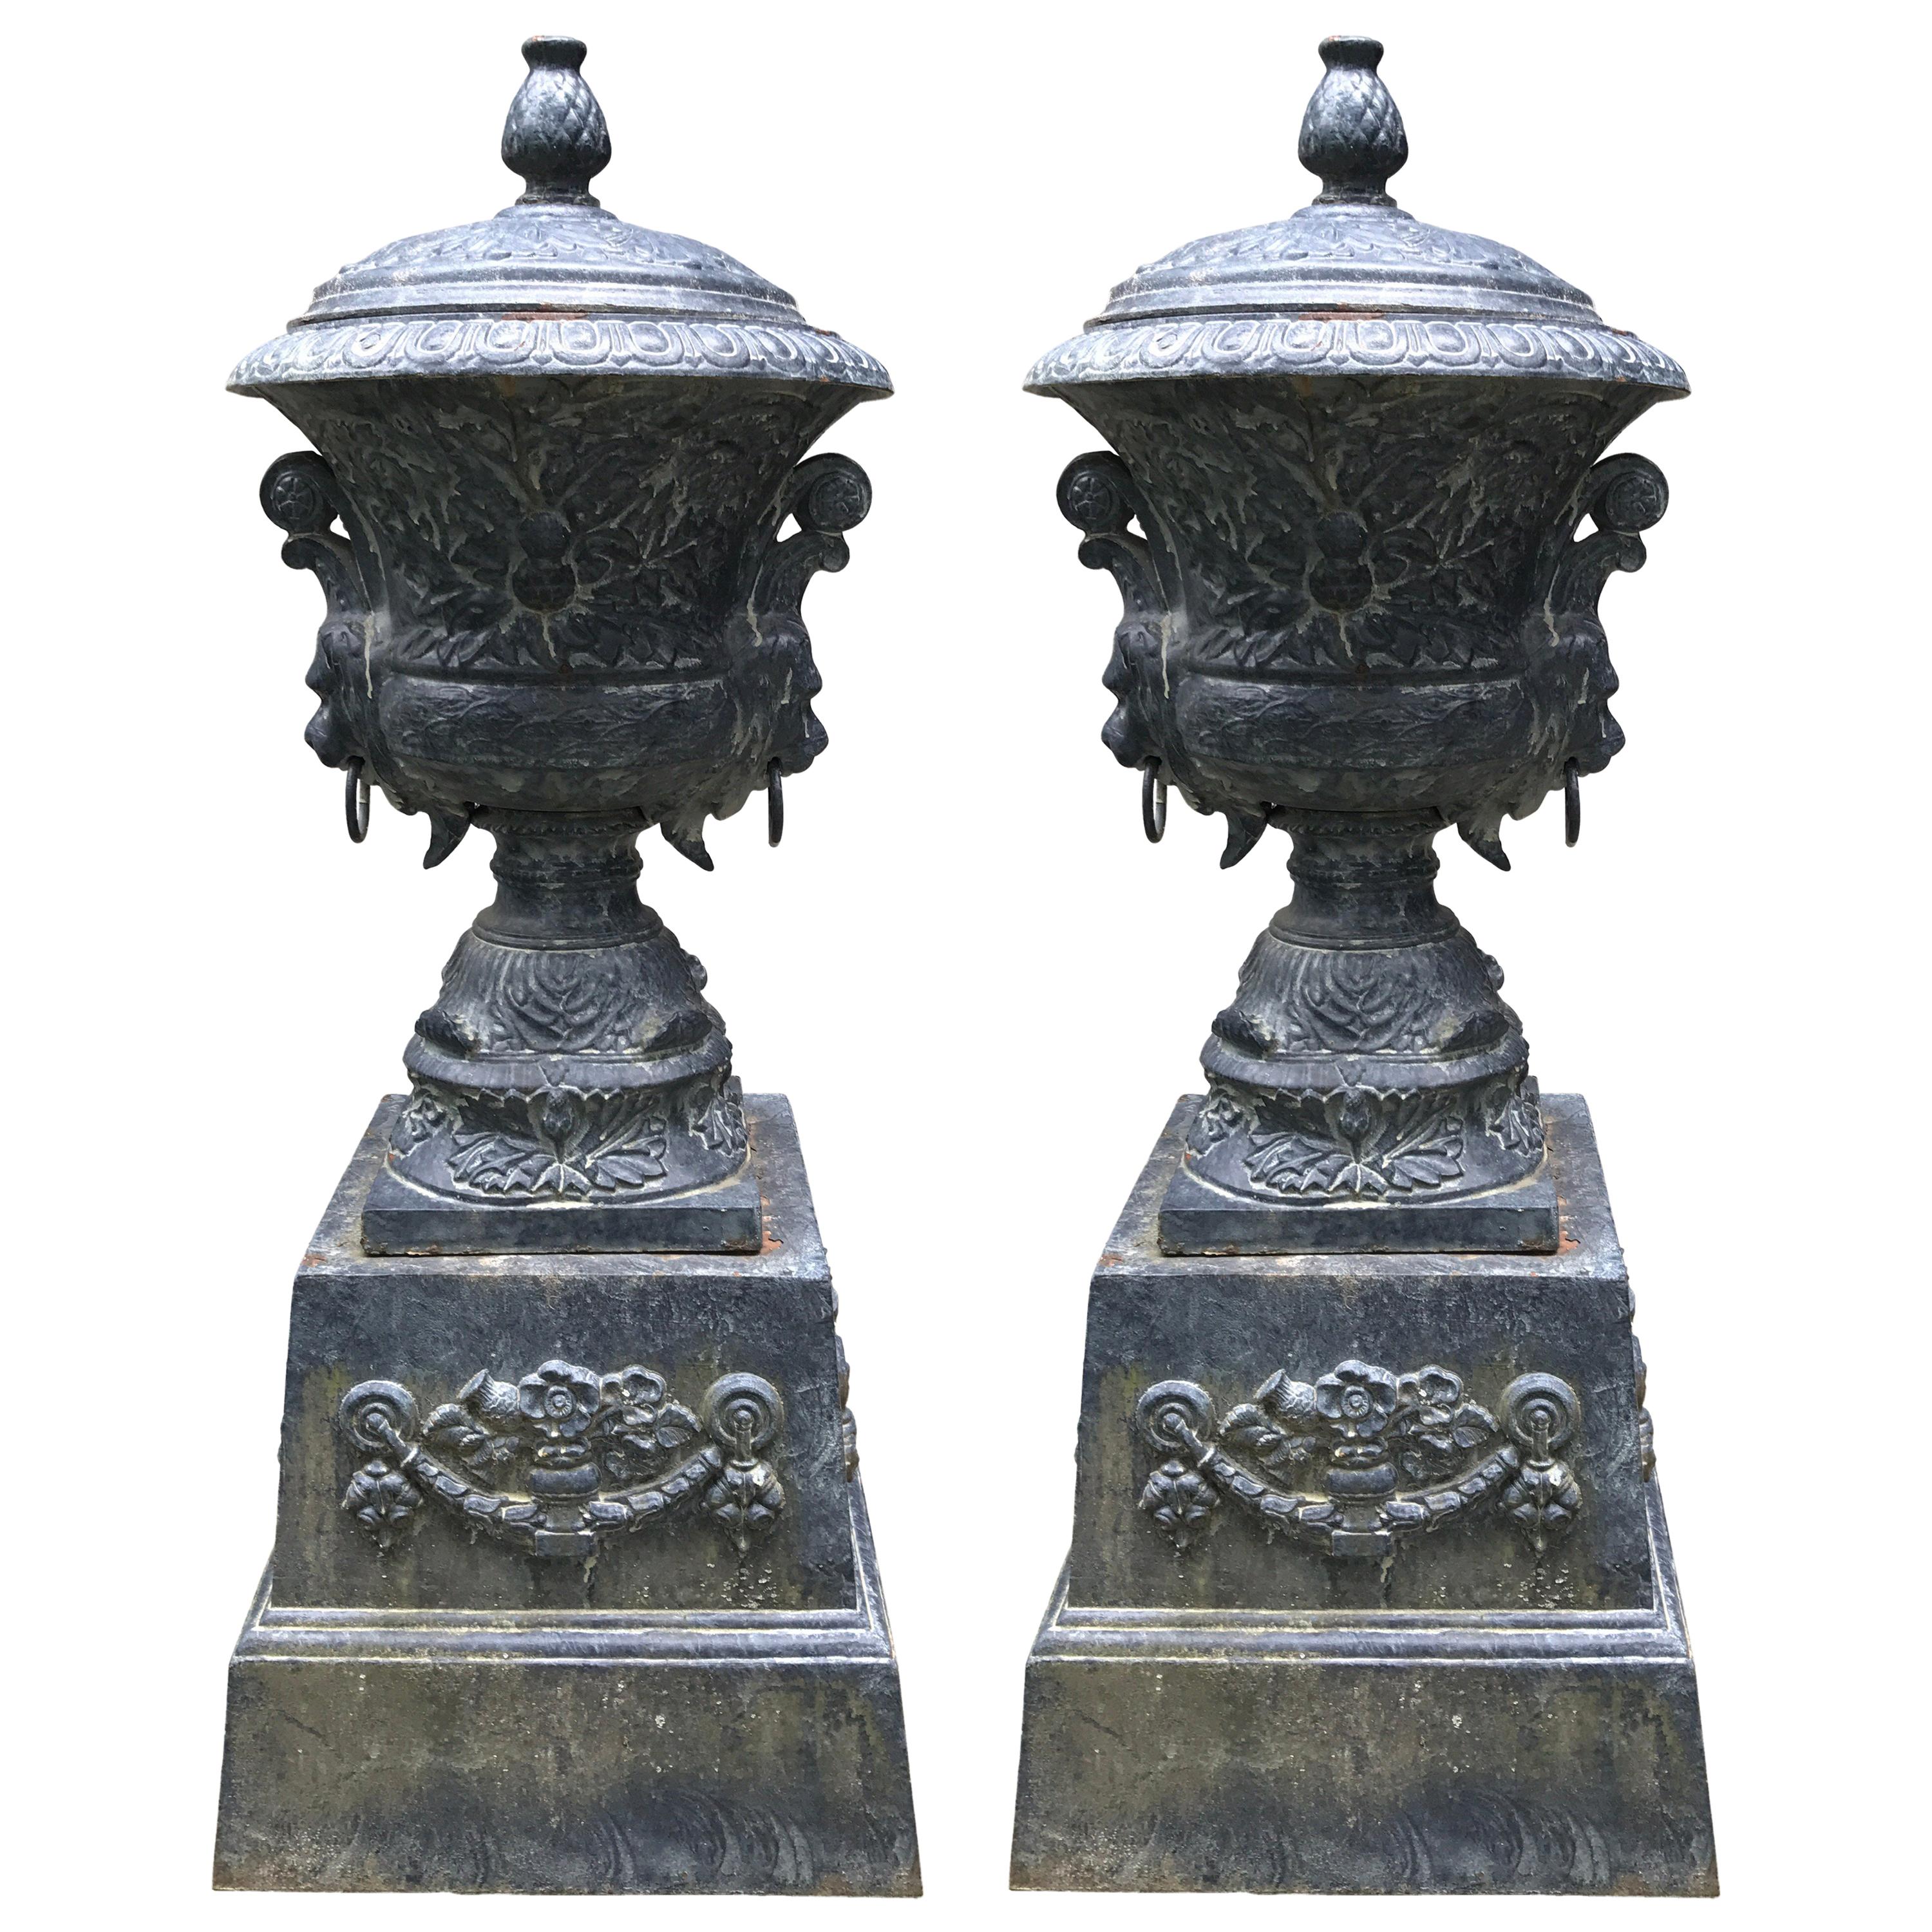 Monumental Antique Covered Cast Iron Urns on Plinths and Lion Head Handles, Pair